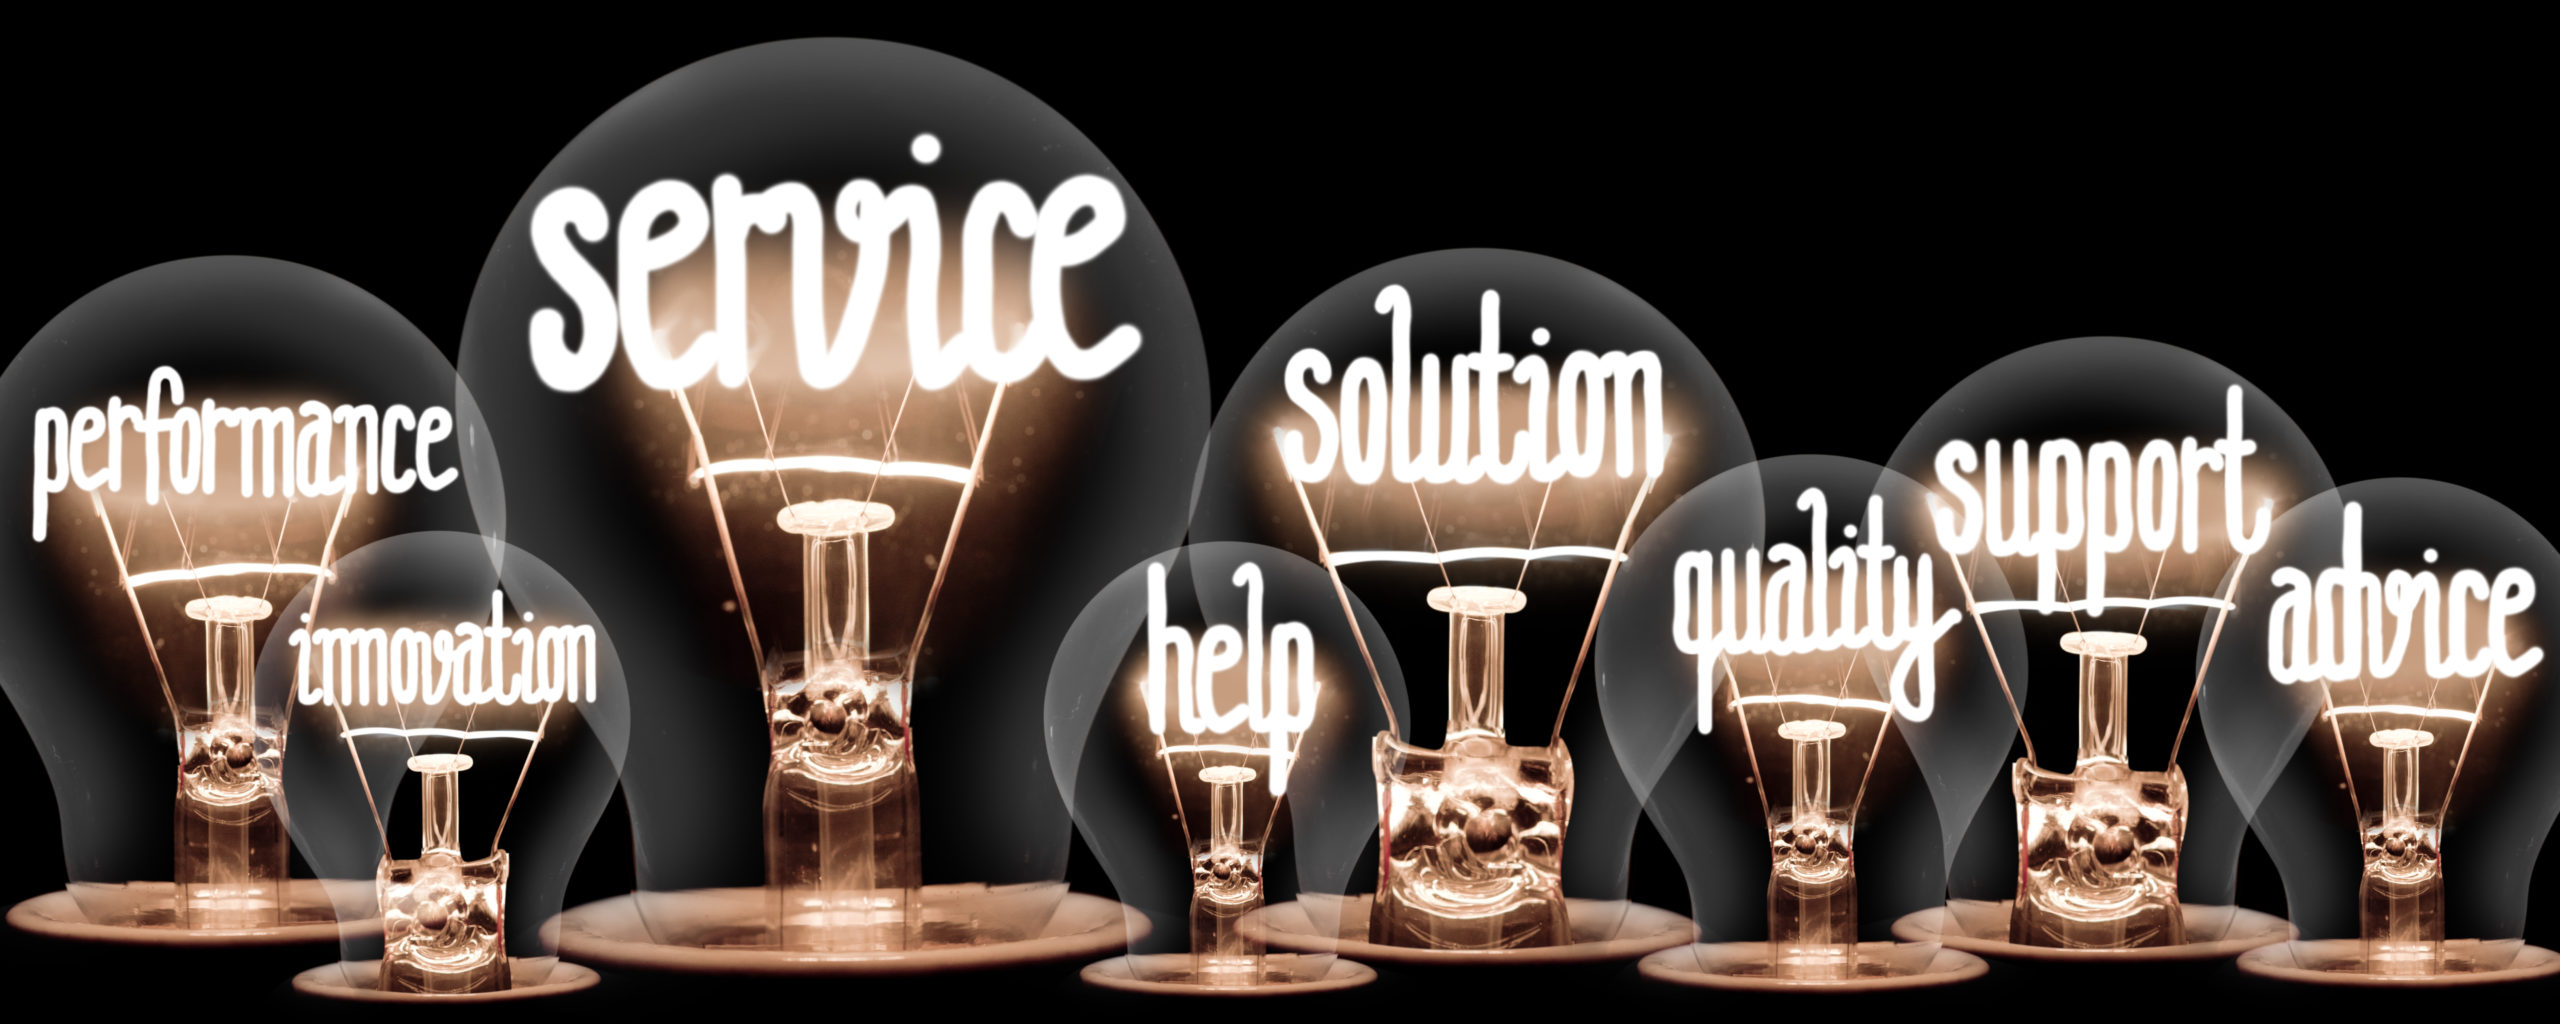 Photo of light bulbs group with shining fibers in a shape of Service, Solution, Support and Help concept related words isolated on black background